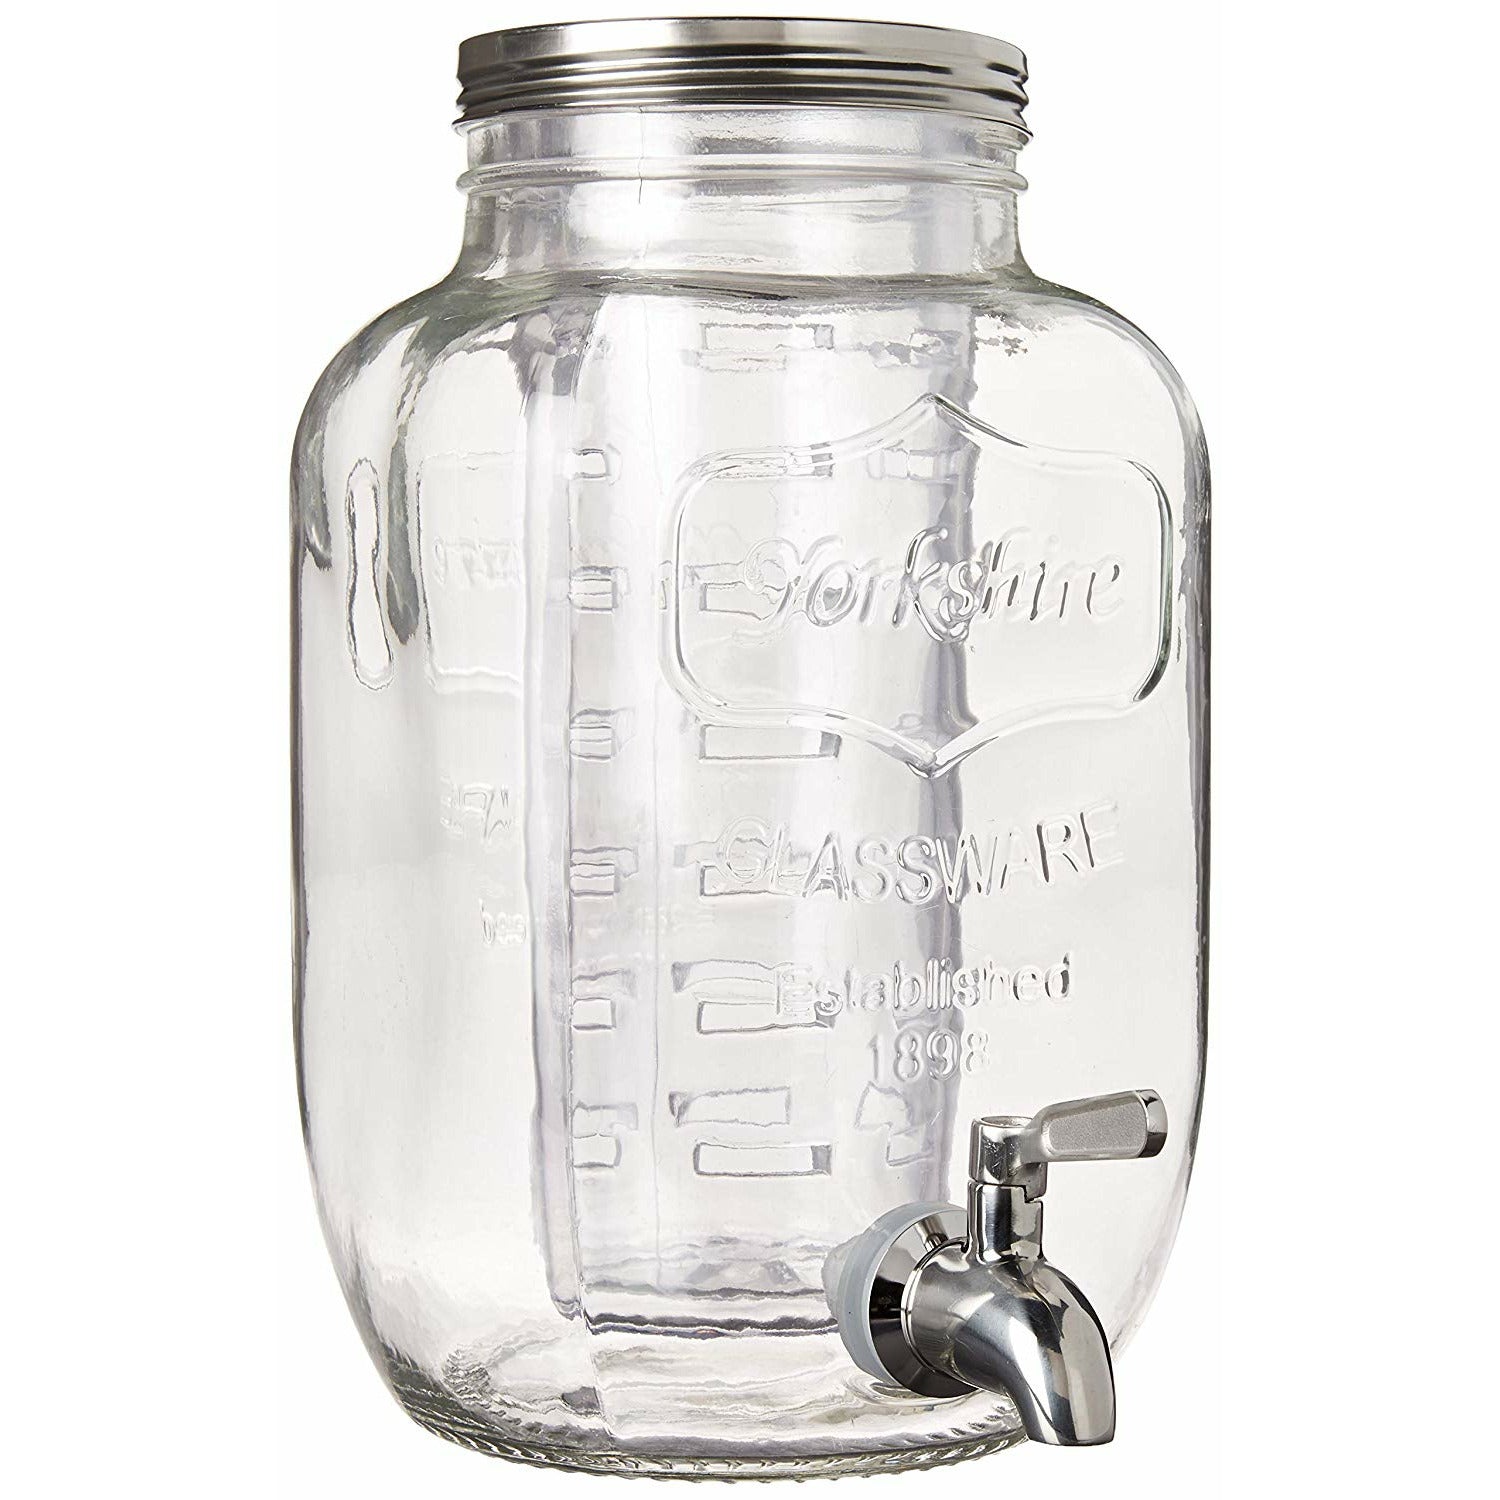 2 Gallon Glass Beverage Dispenser with Ice and Fruit Infusers, Steel Spigot